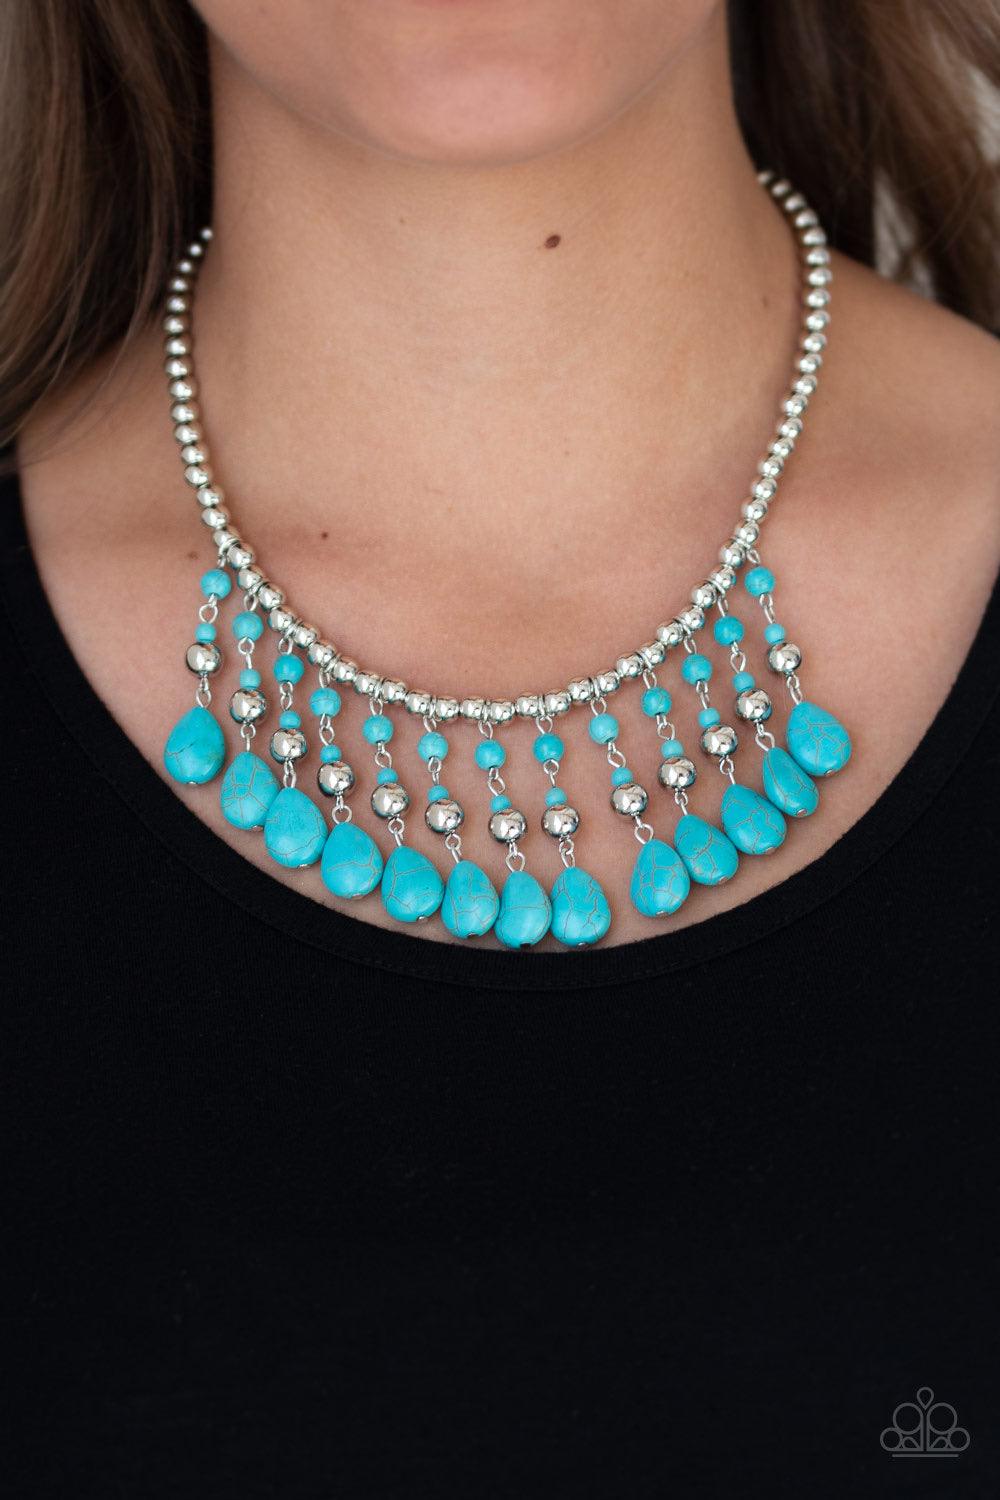 Paparazzi Accessories Rural Revival - Blue Shiny silver beads are threaded along an invisible wire below the collar. Infused with silver beaded accents, refreshing turquoise beads swing from the bottom of the beaded strand, creating an earthy fringe. Feat